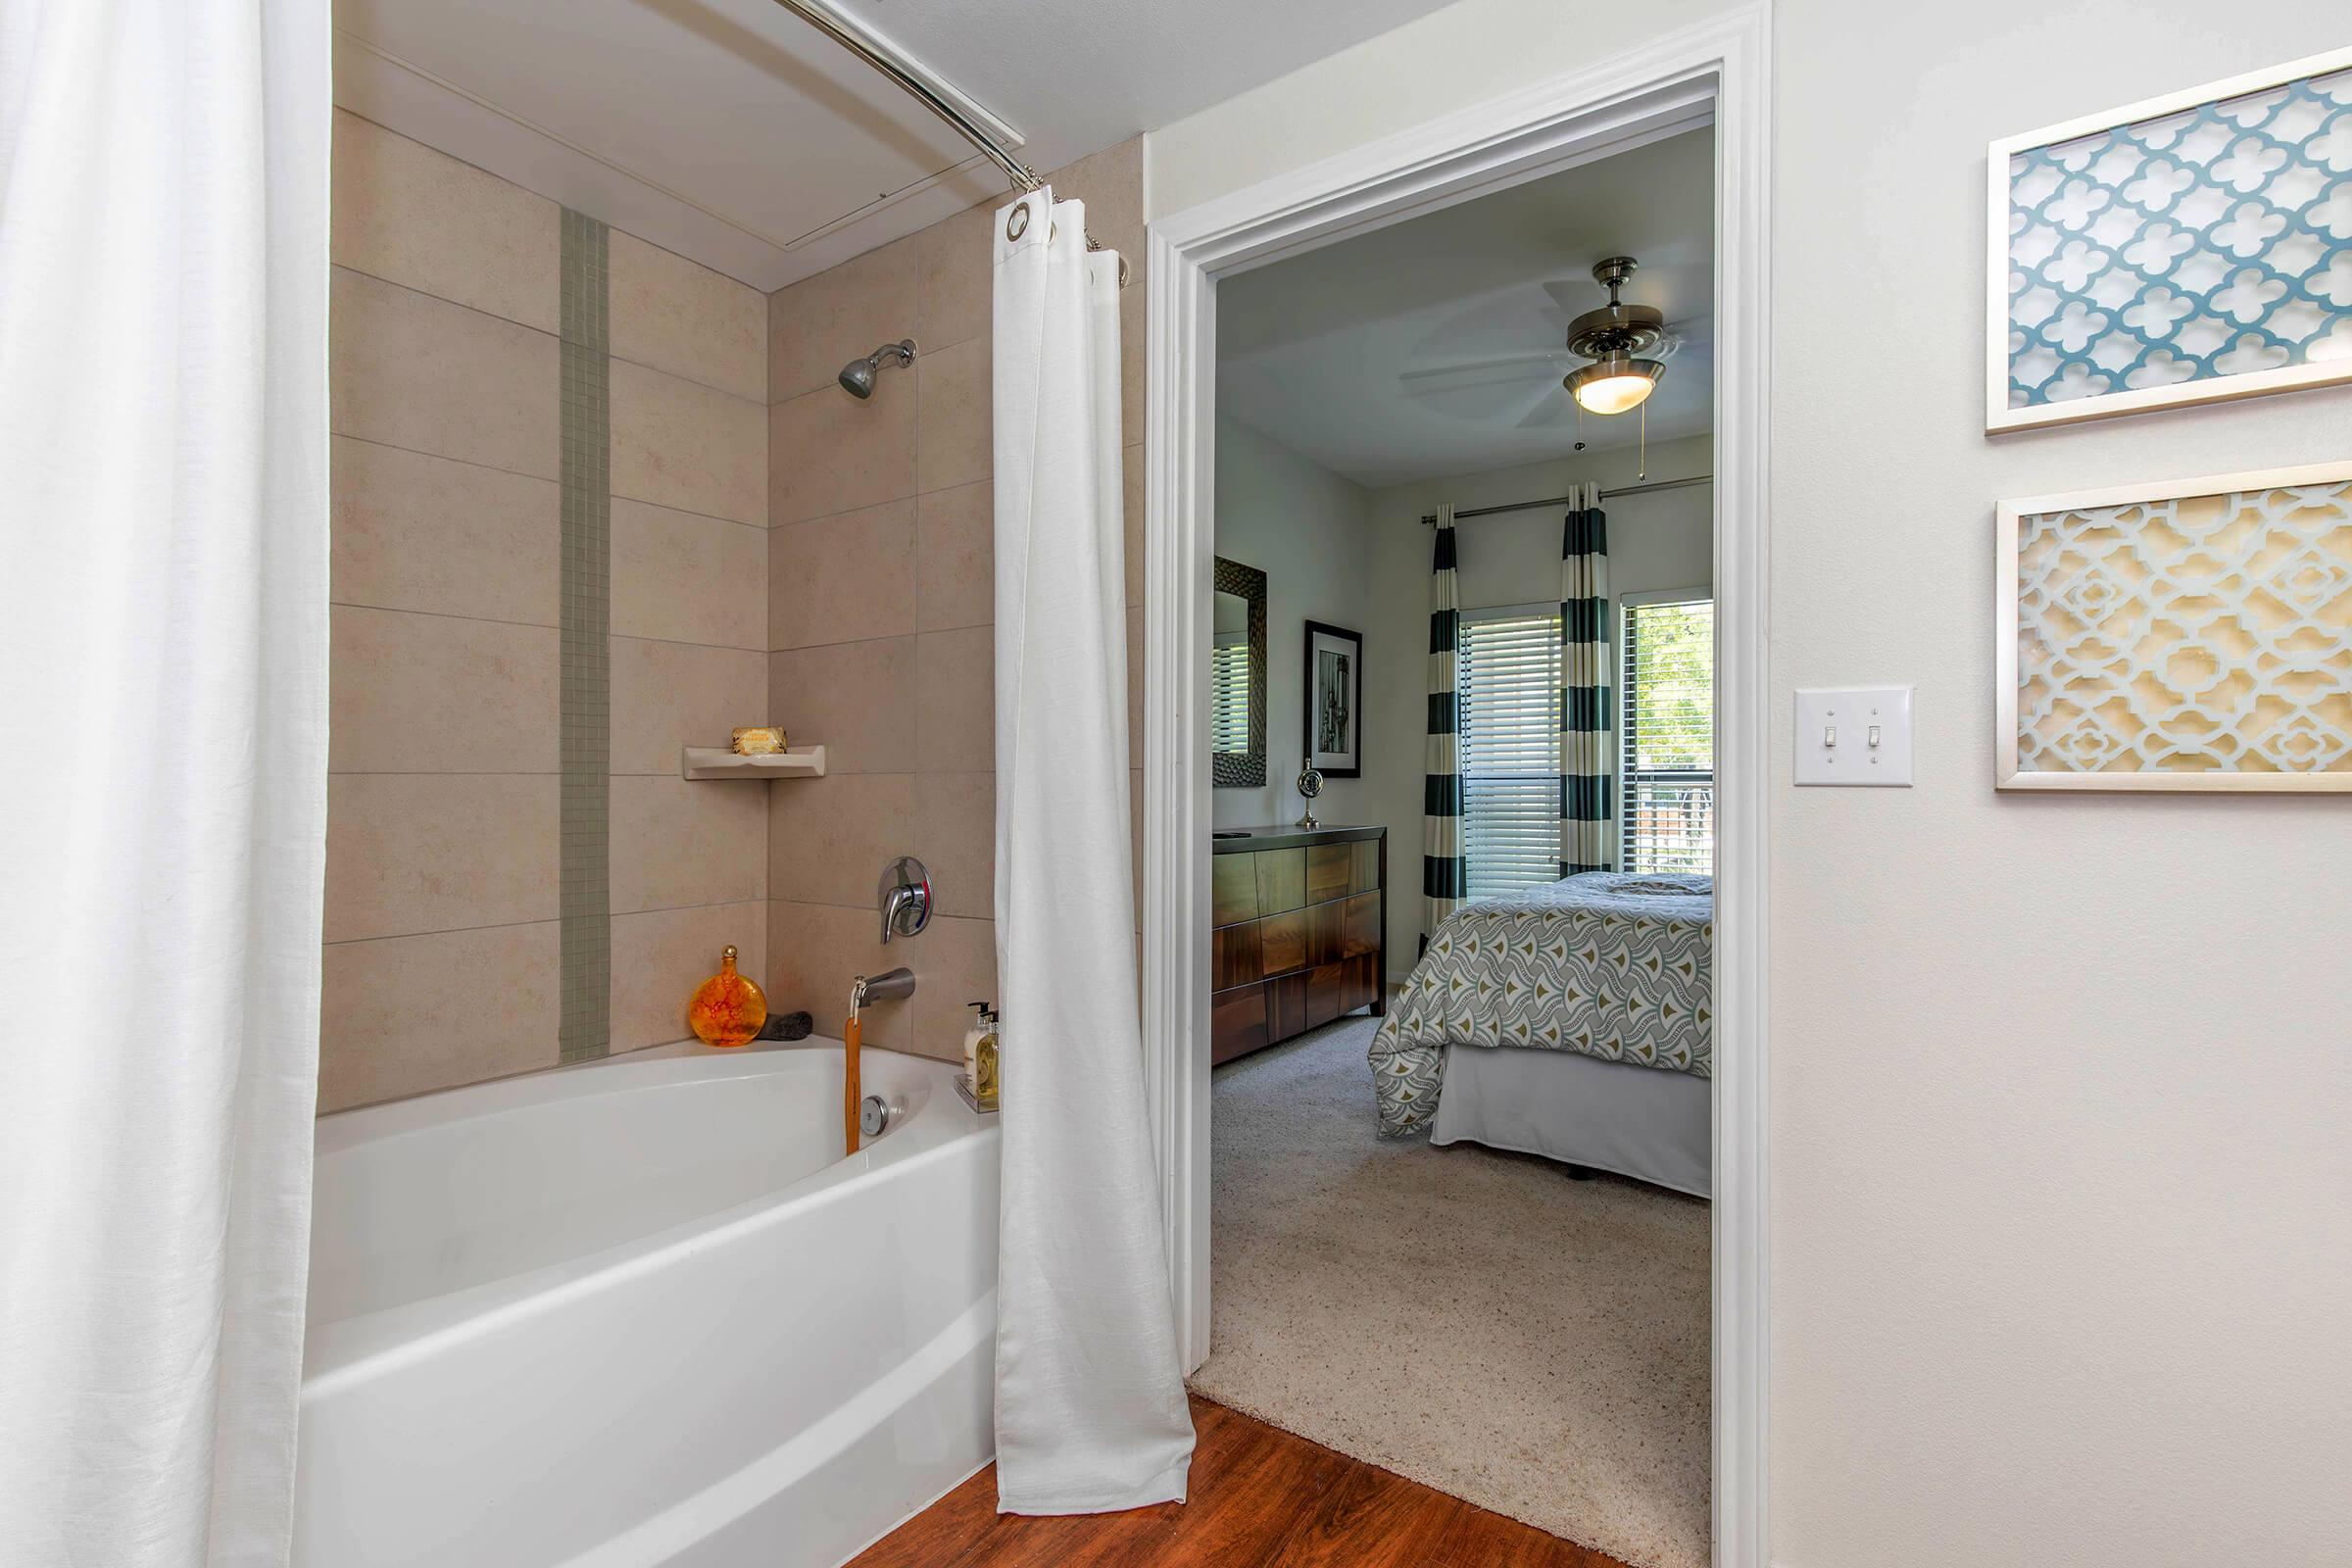 a view of the shower and tub